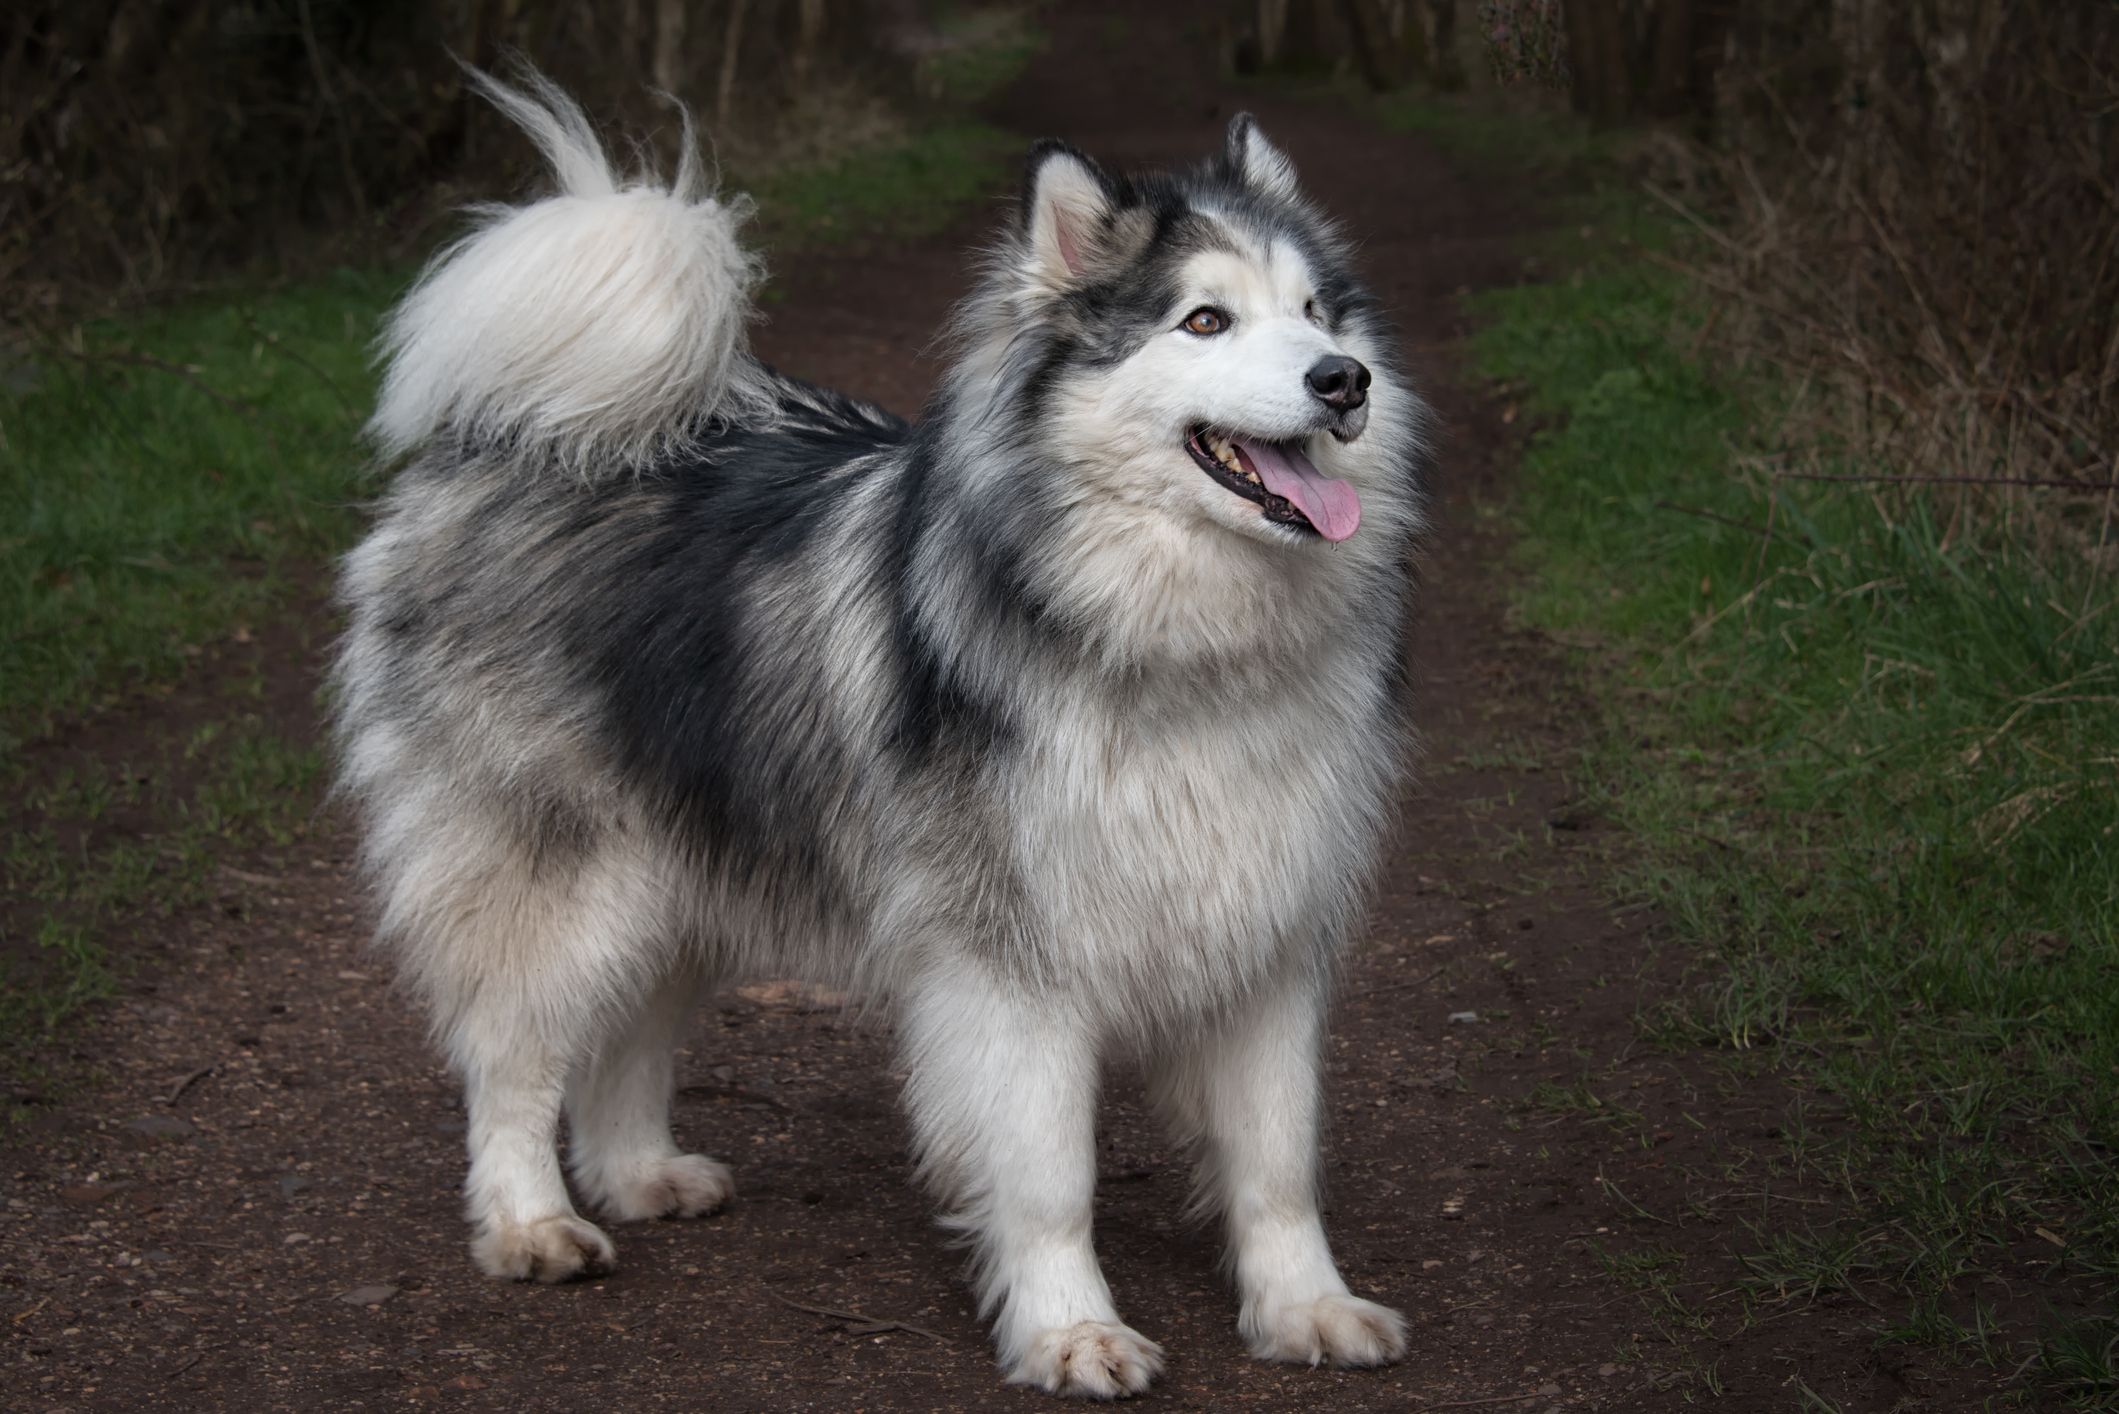 are huskies or malamutes closer to wolves